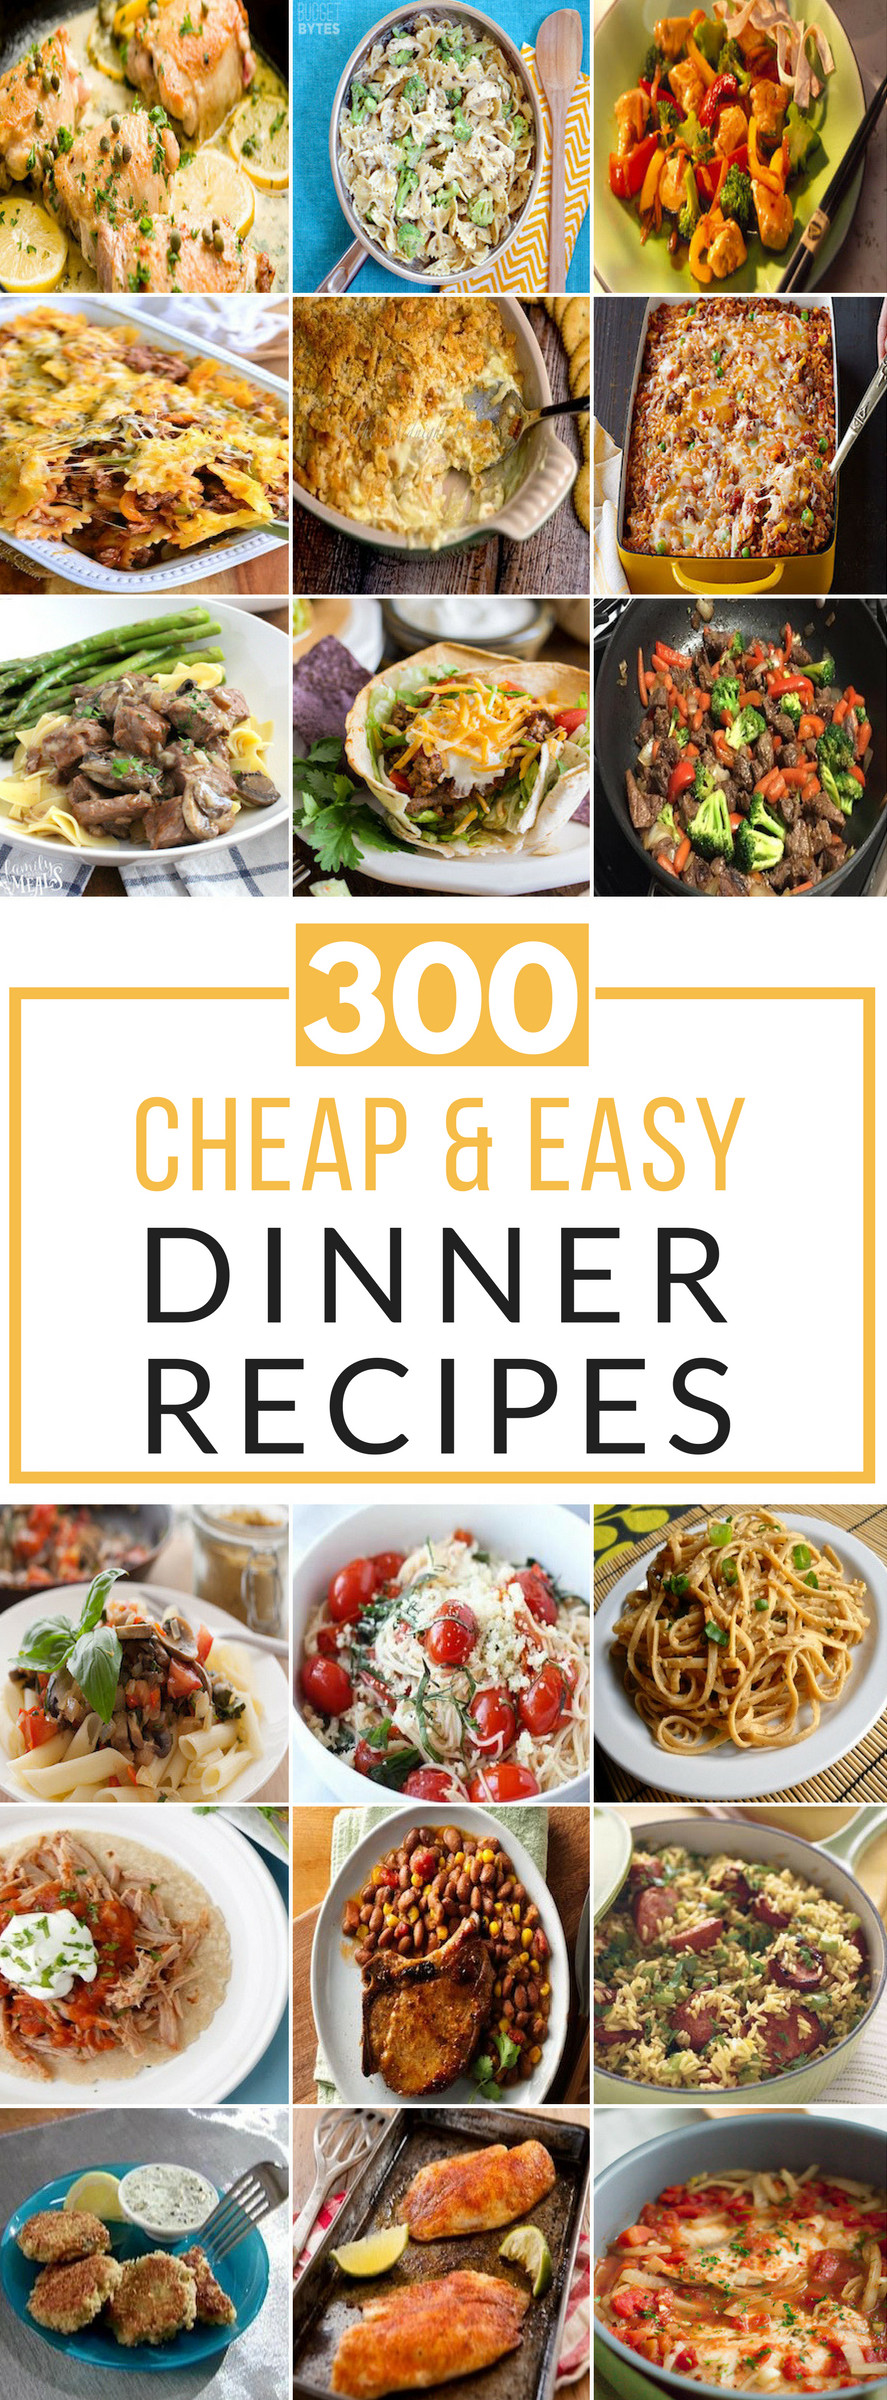 Easy Cheap Dinner Ideas
 300 Cheap and Easy Dinner Recipes Prudent Penny Pincher